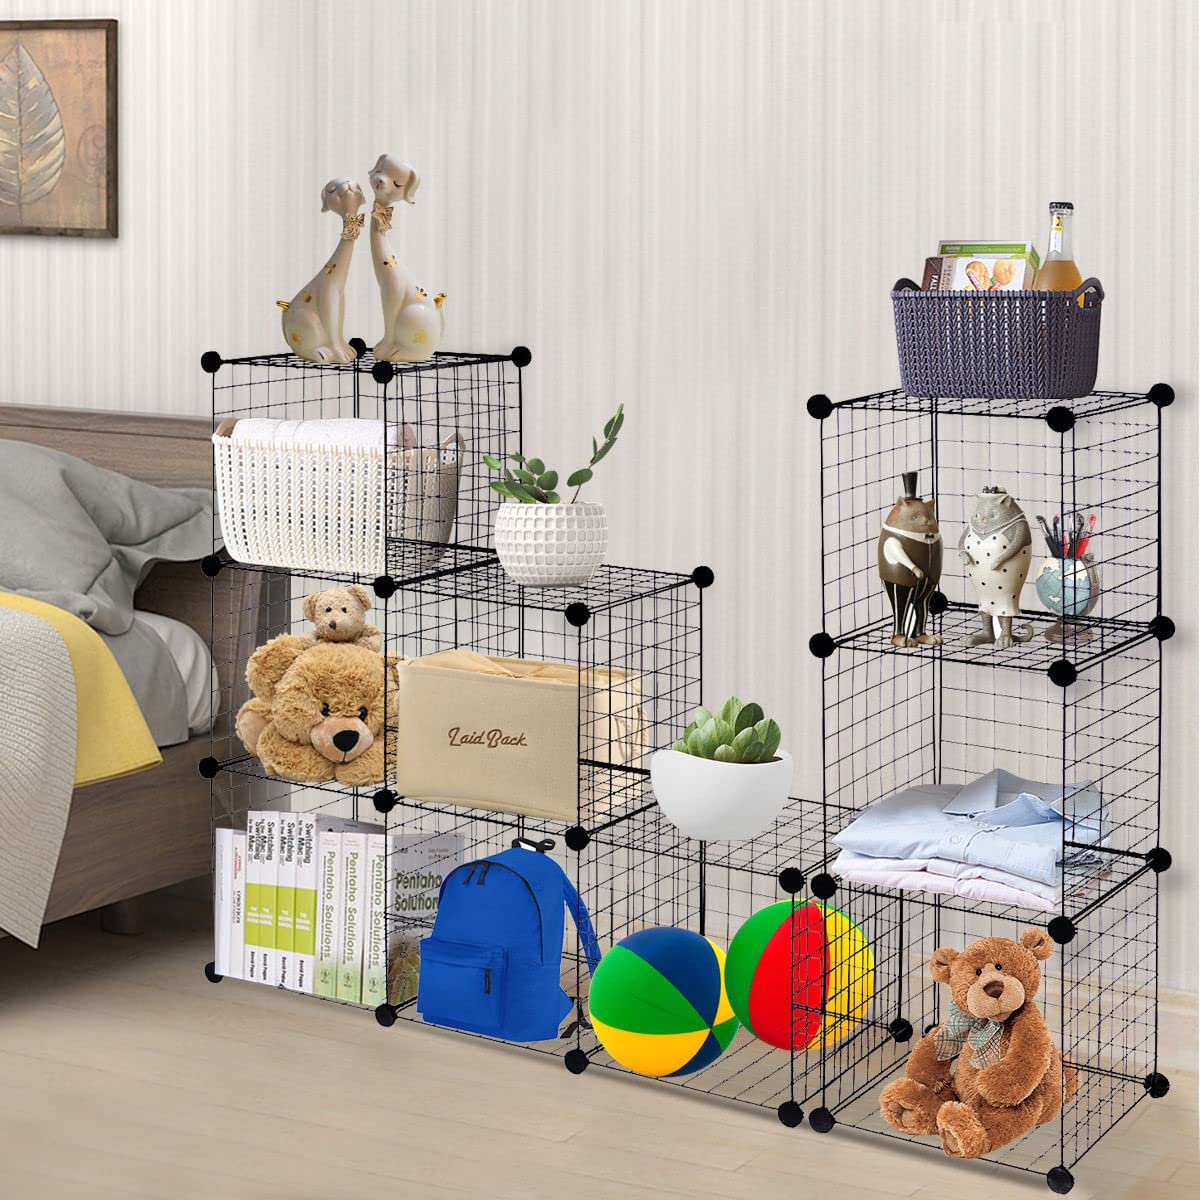 Giantex Metal Wire Cube Storage, 12-Cube Stackable Free Standing Cubby Storage Organizer Shelf